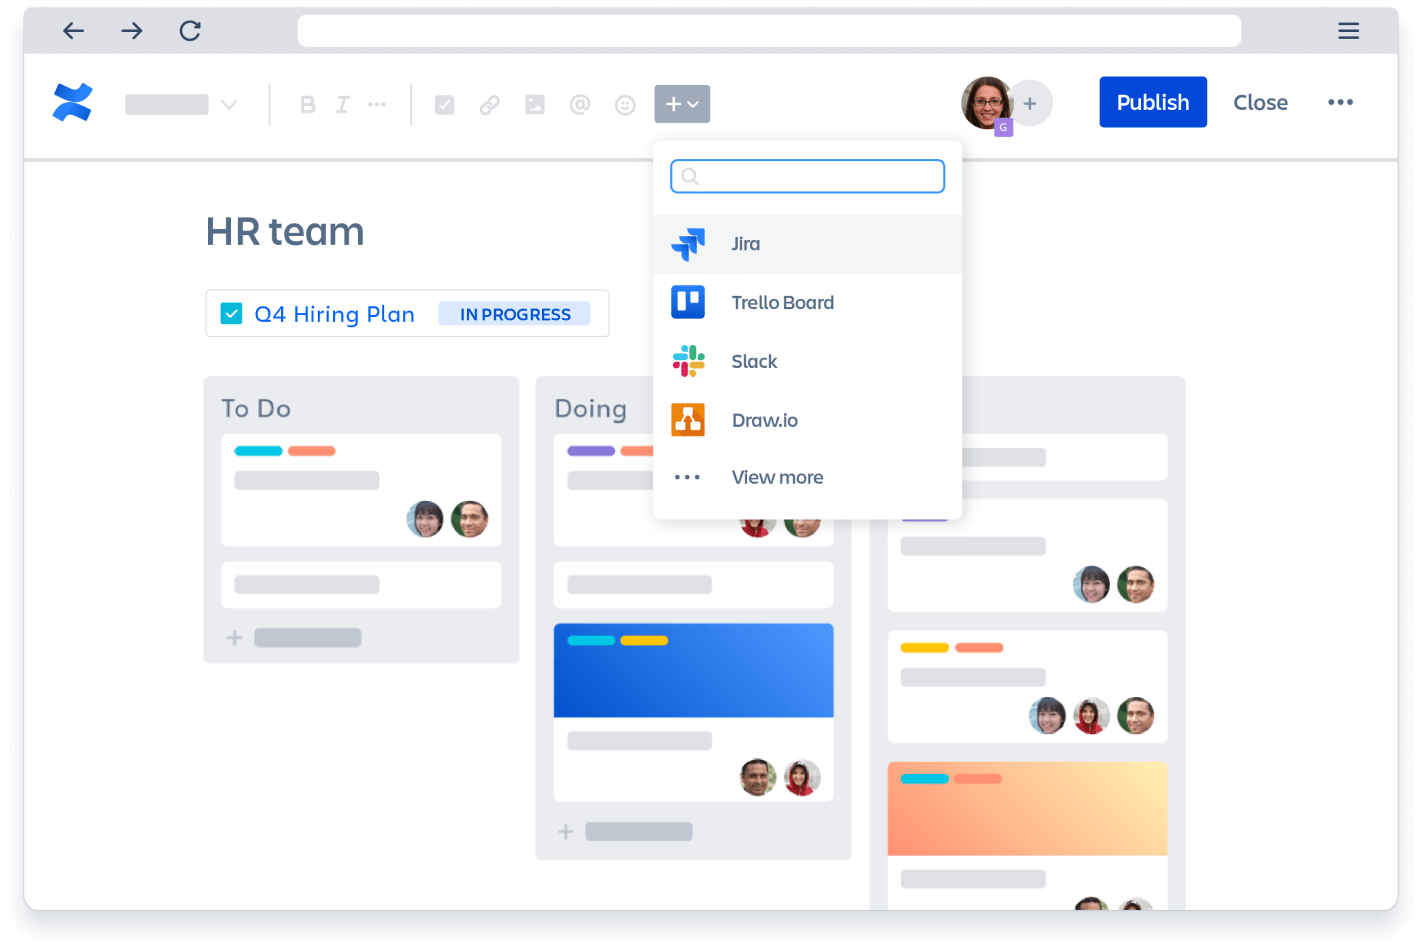 Navigating between seamless integrations between Confluence and Jira, Trello, Slack, and Draw.io